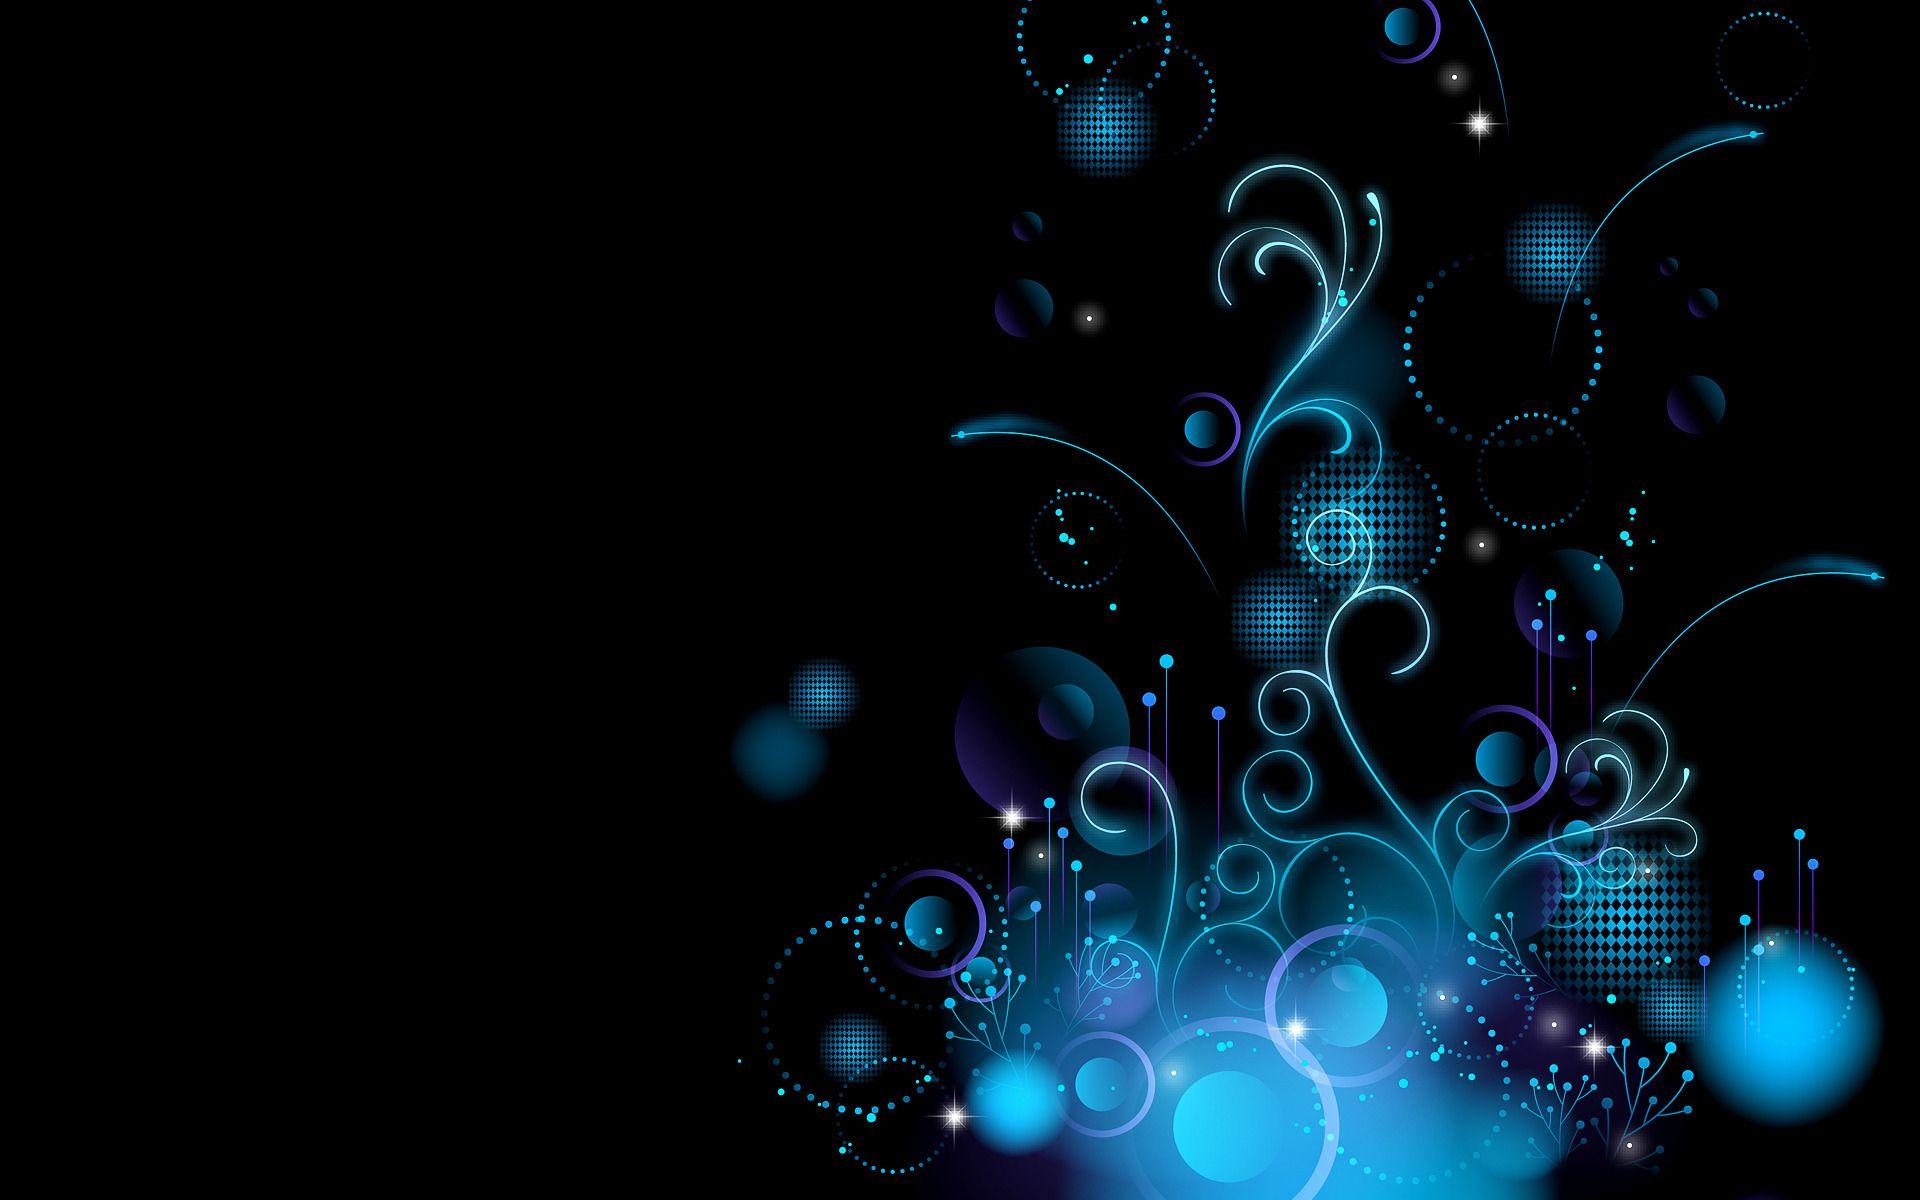 Amazing Abstract Wallpaper, HT267 HDQ Wallpaper For Desktop And Mobile